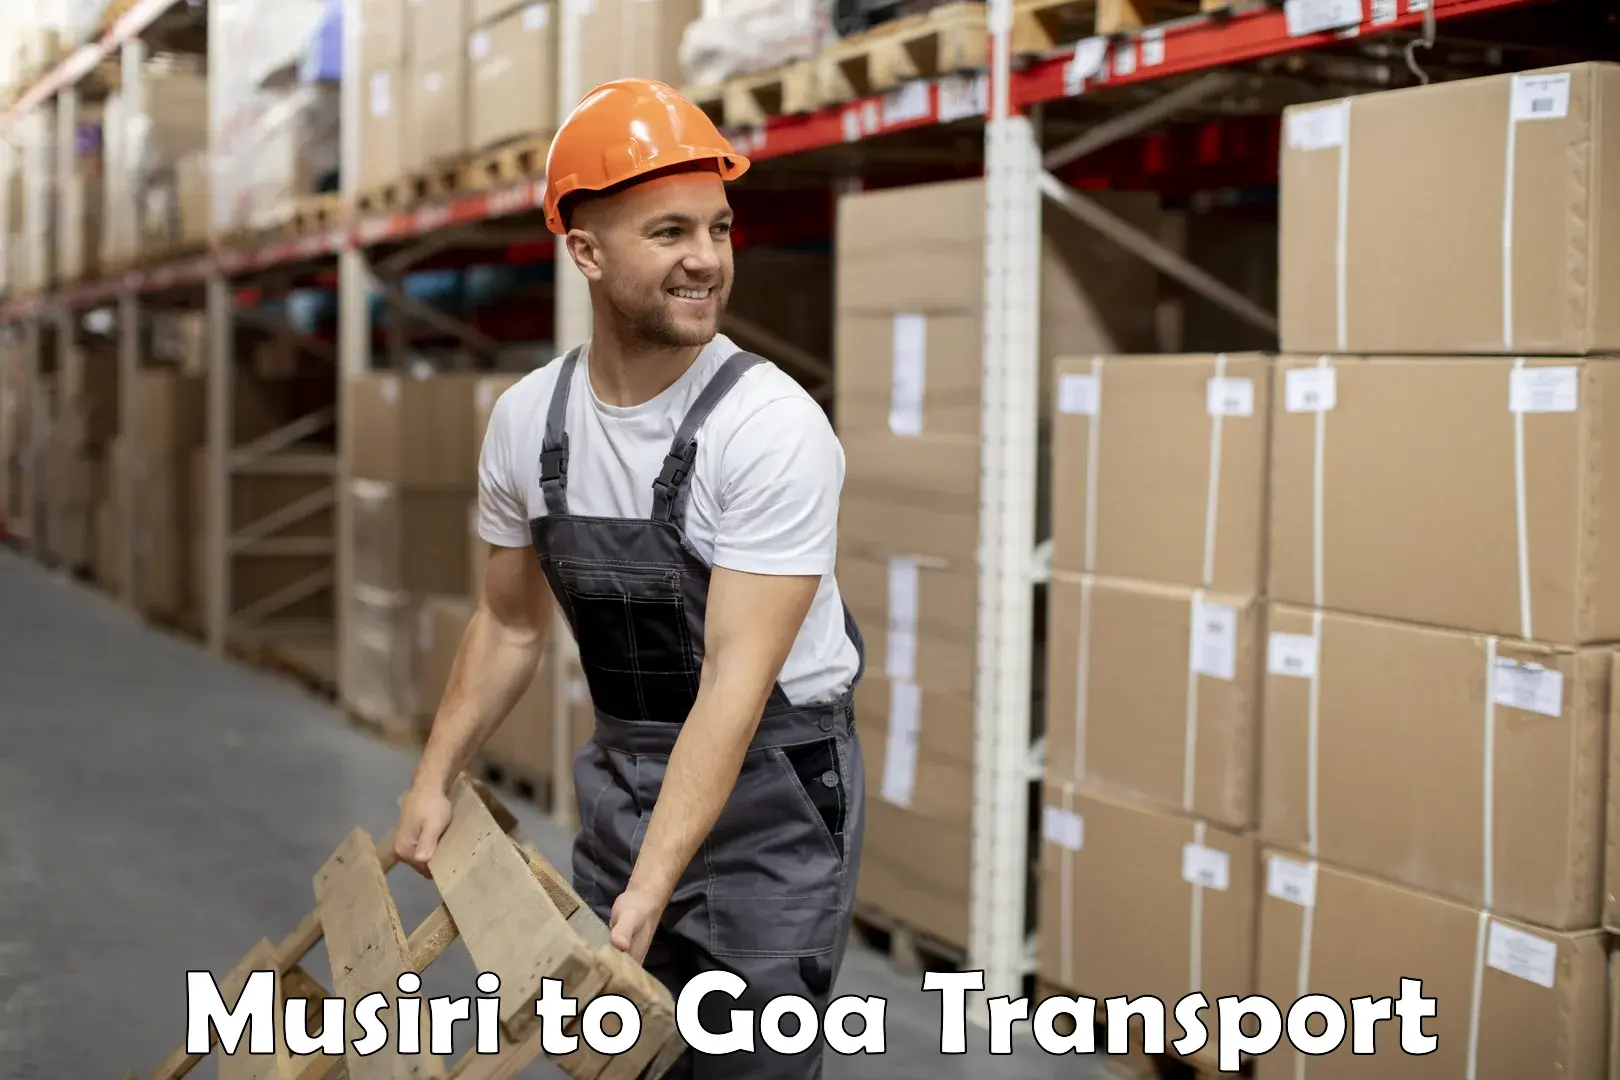 Express transport services Musiri to South Goa